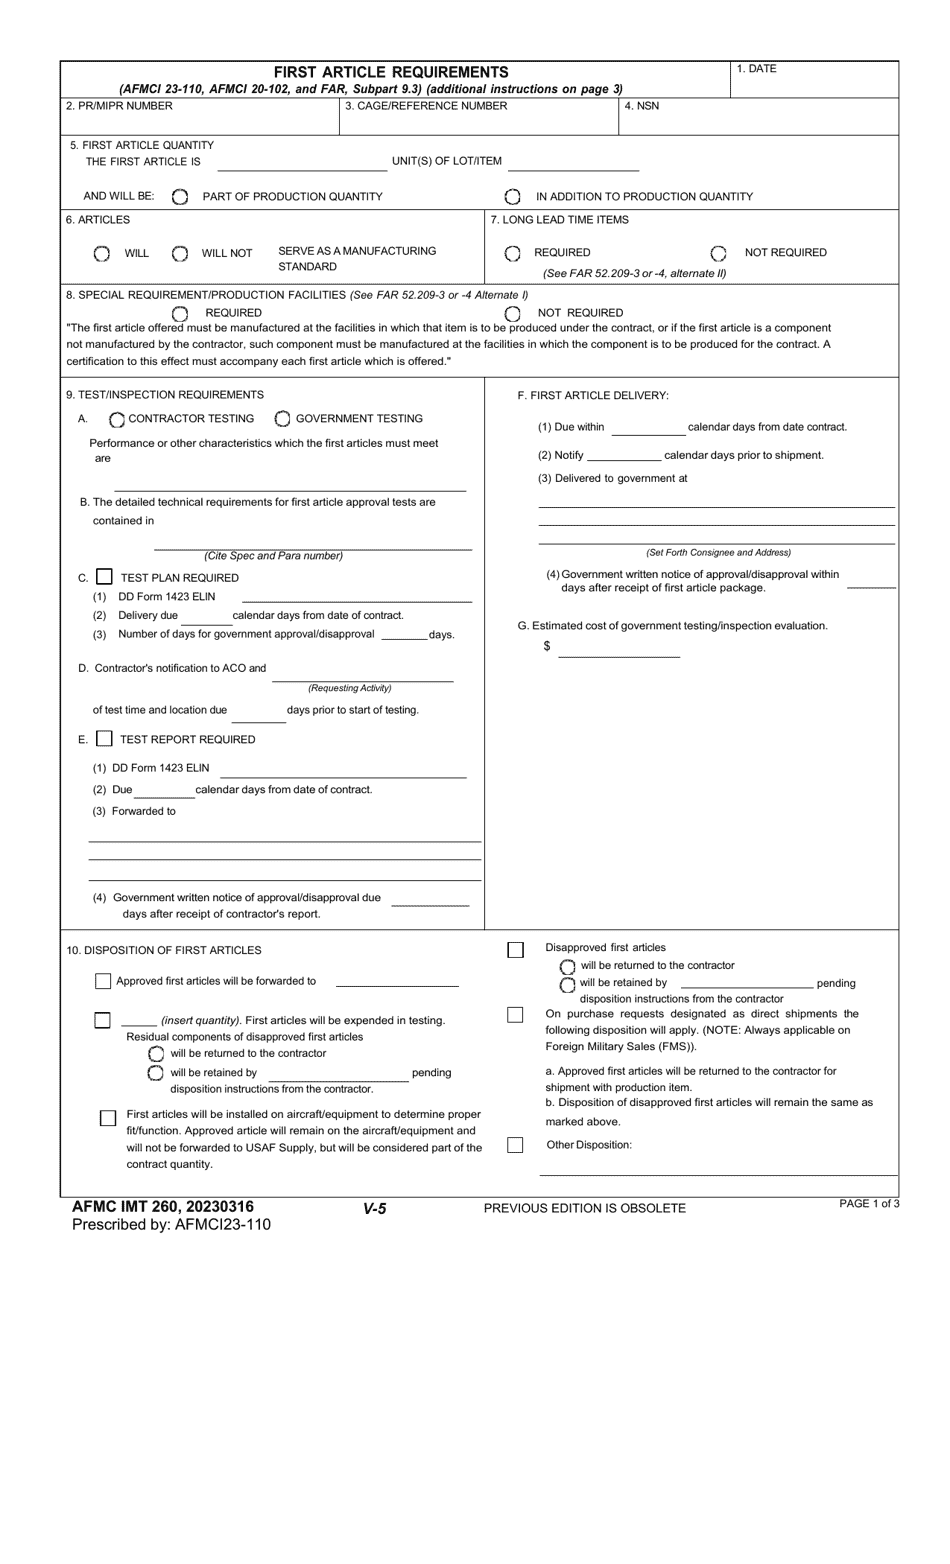 AFMC IMT Form 260 First Article Requirements, Page 1